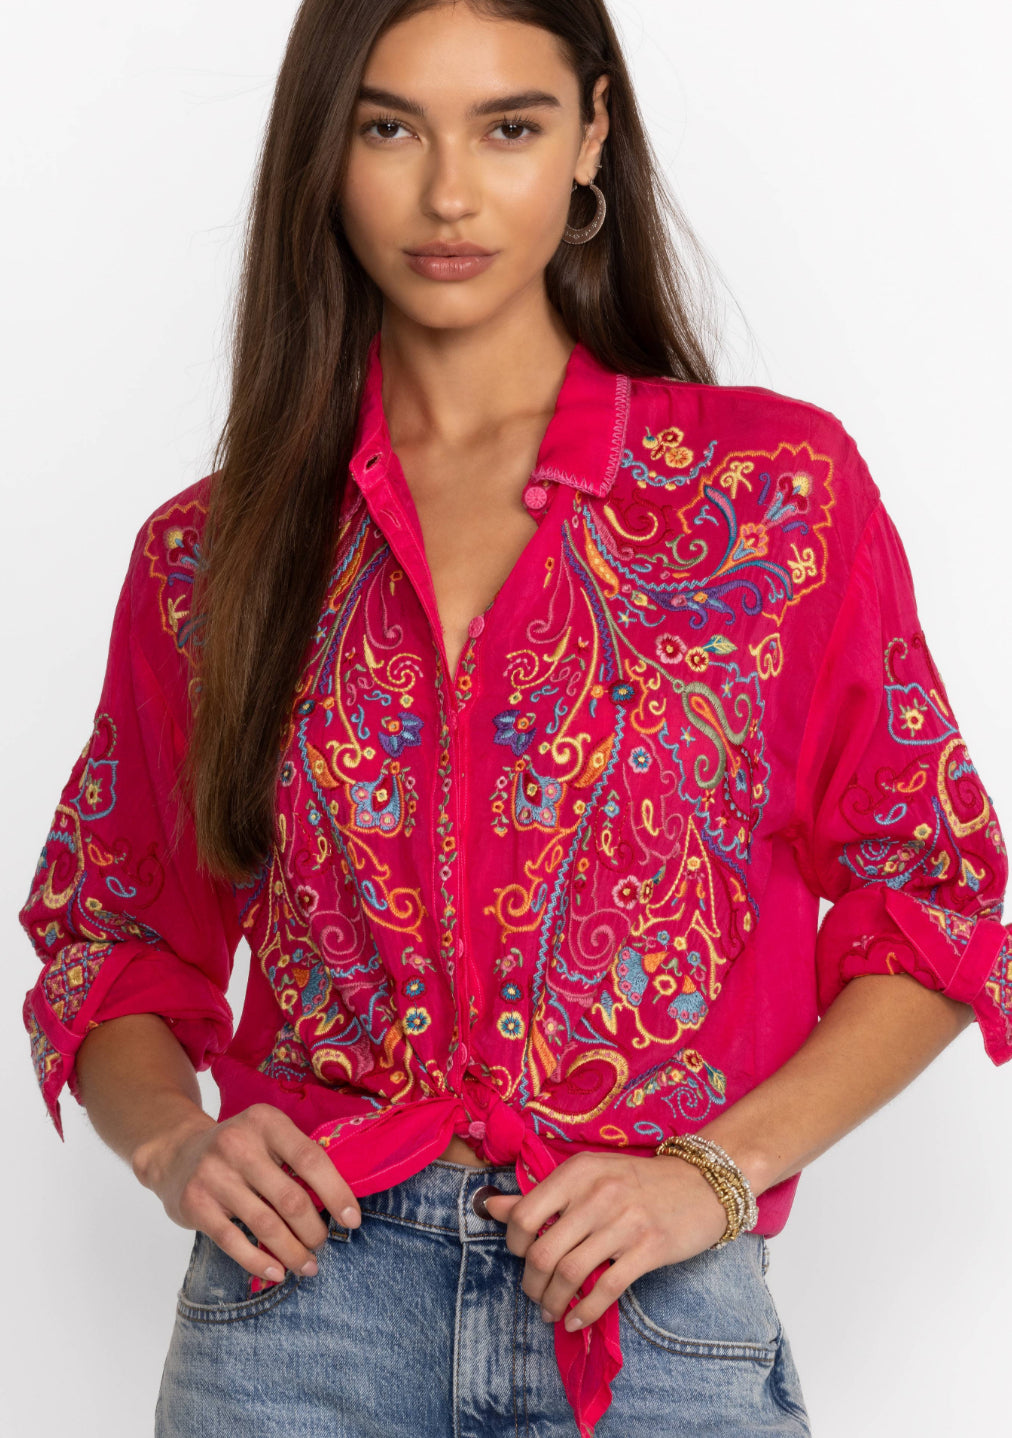 Johnny Was: Cachemire Tunic in Ultra Pink